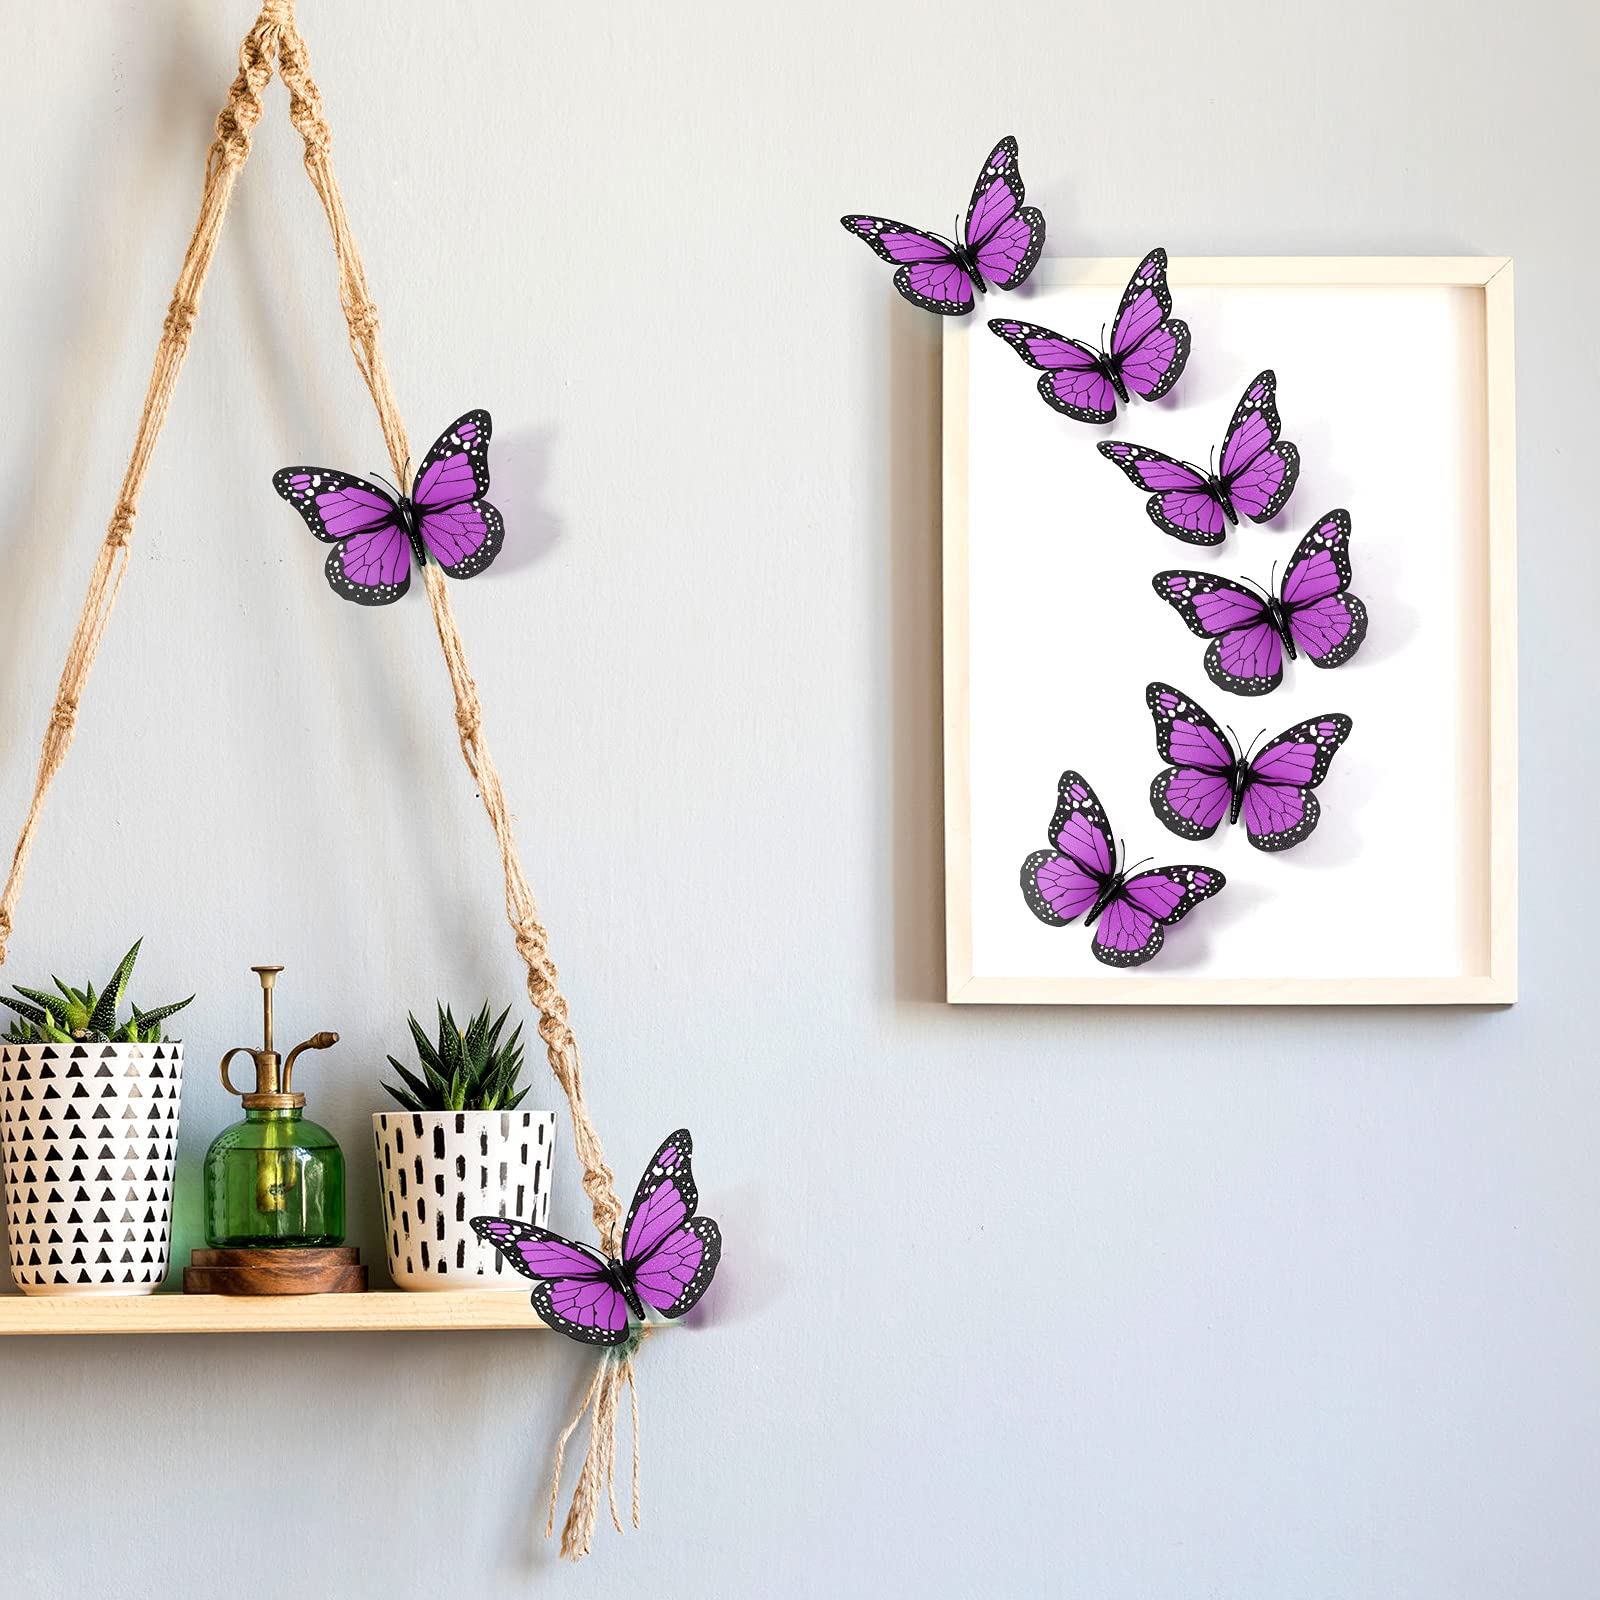 Monarch Butterfly Decorations Halloween Butterfly Wall Decor 4.7 inch Orange Artificial Fake Butterflies for Crafts 3D Magnet for Home Wall Wedding Bedroom (Purple, 24 Pieces)